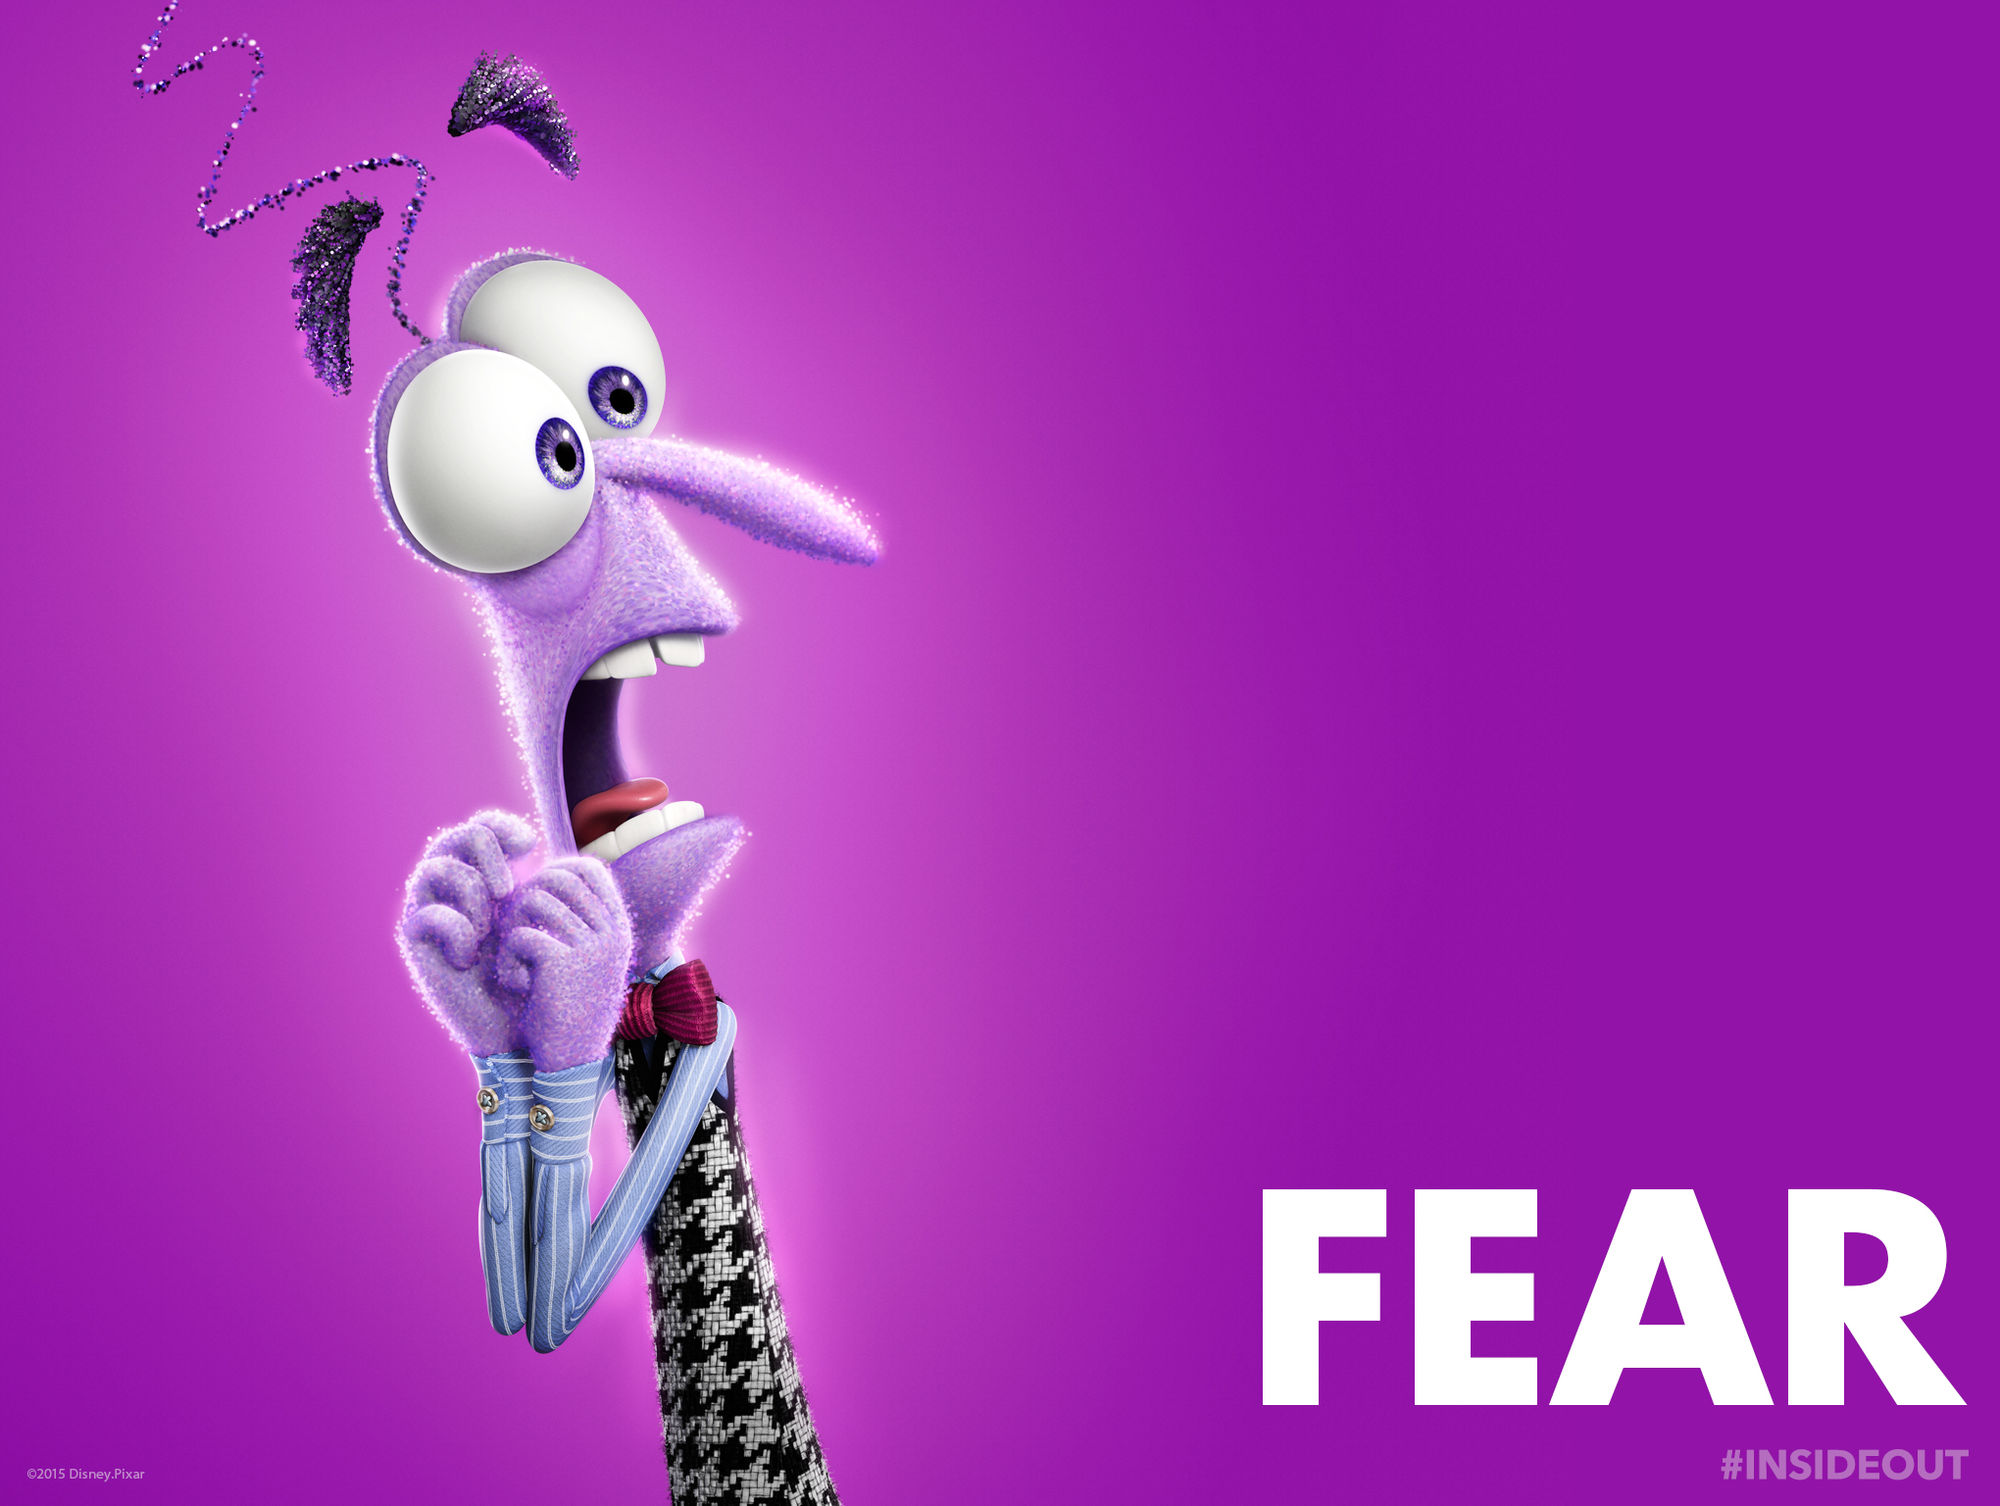 Promotional image of Fear from Pixar’s Inside Out